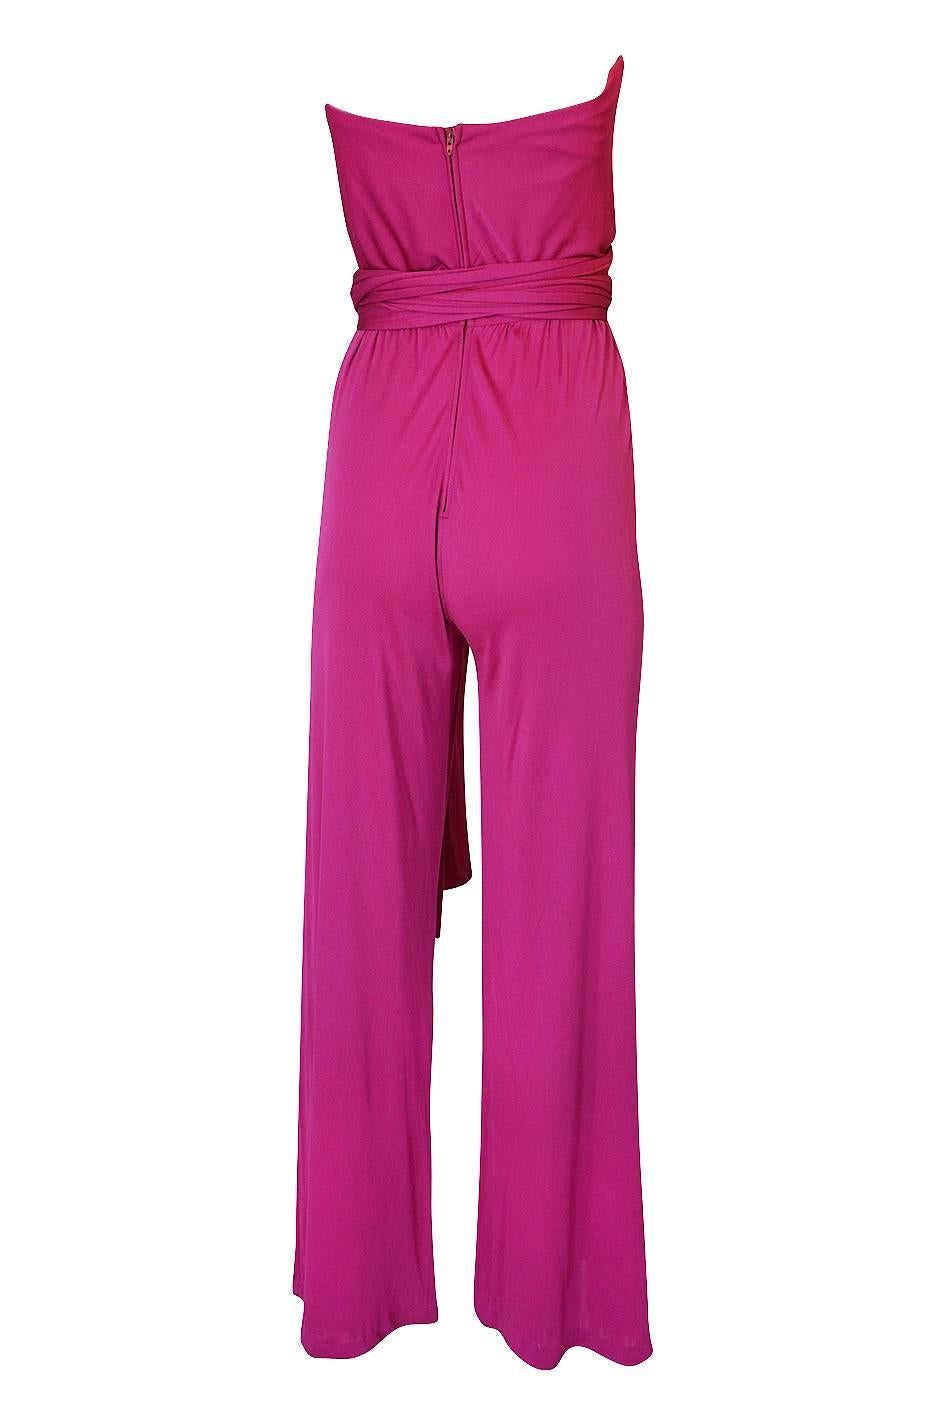 Scott Barrie was known for designing beautiful and sexy clothing. He was particularly adept in the use of silk chiffon and silk jersey, both notoriously difficult fabrics to work with. For this jumpsuit he uses a pink silk jersey and that color is